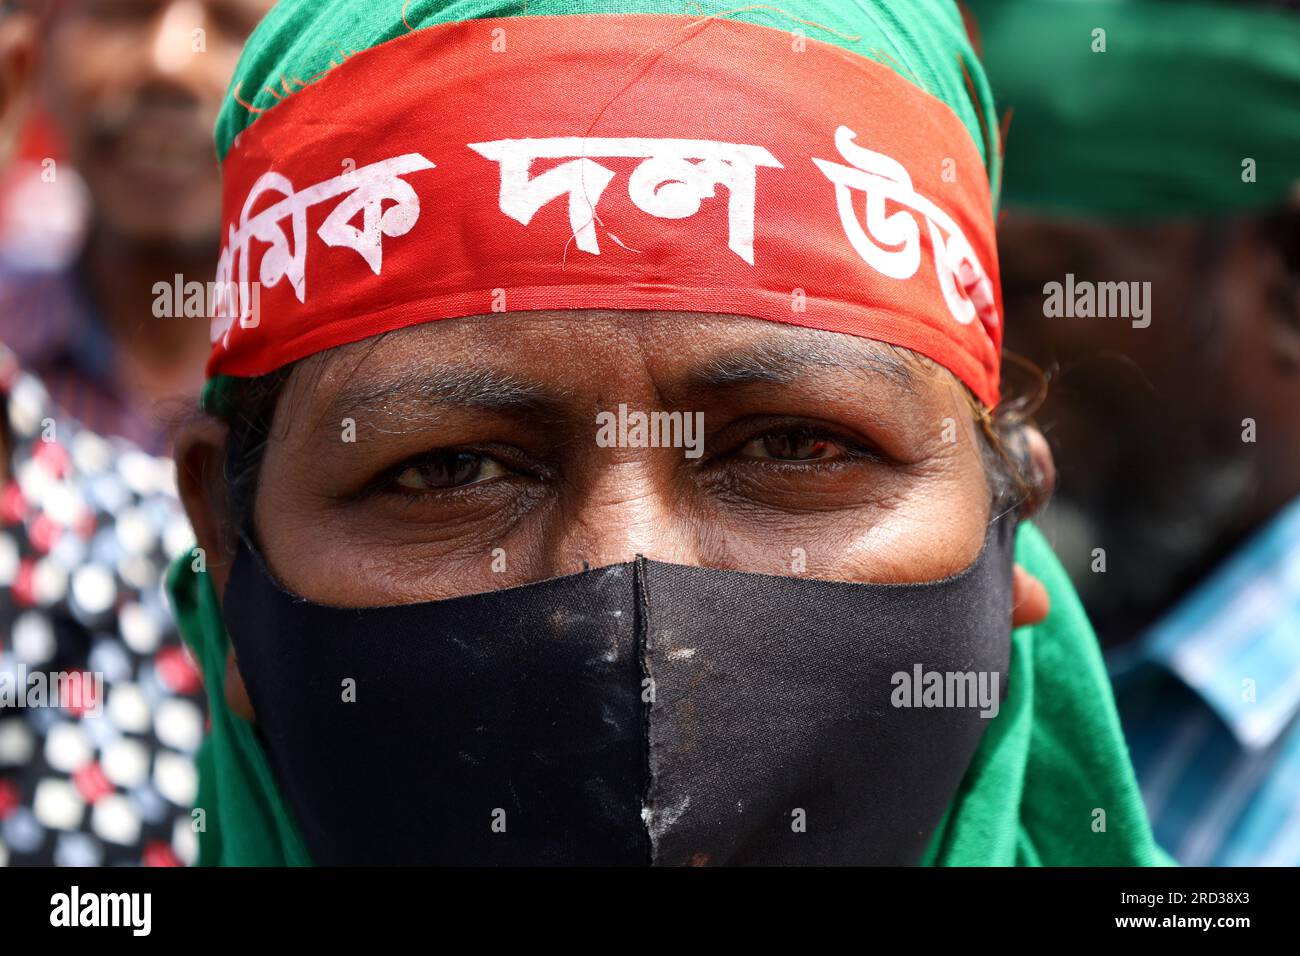 Dhaka, Dhaka, Bangladesh. 18th July, 2023. The main opposition party The Bangladesh Nationalist Party (BNP) organized a road march of about 20 kilometers from Gabtali in Dhaka to Bahadur Shah Park in Old Dhaka to demand the resignation of Prime Minister Sheikh HasinaÂ and elections under a caretaker government. Credit: ZUMA Press, Inc./Alamy Live News Stock Photo